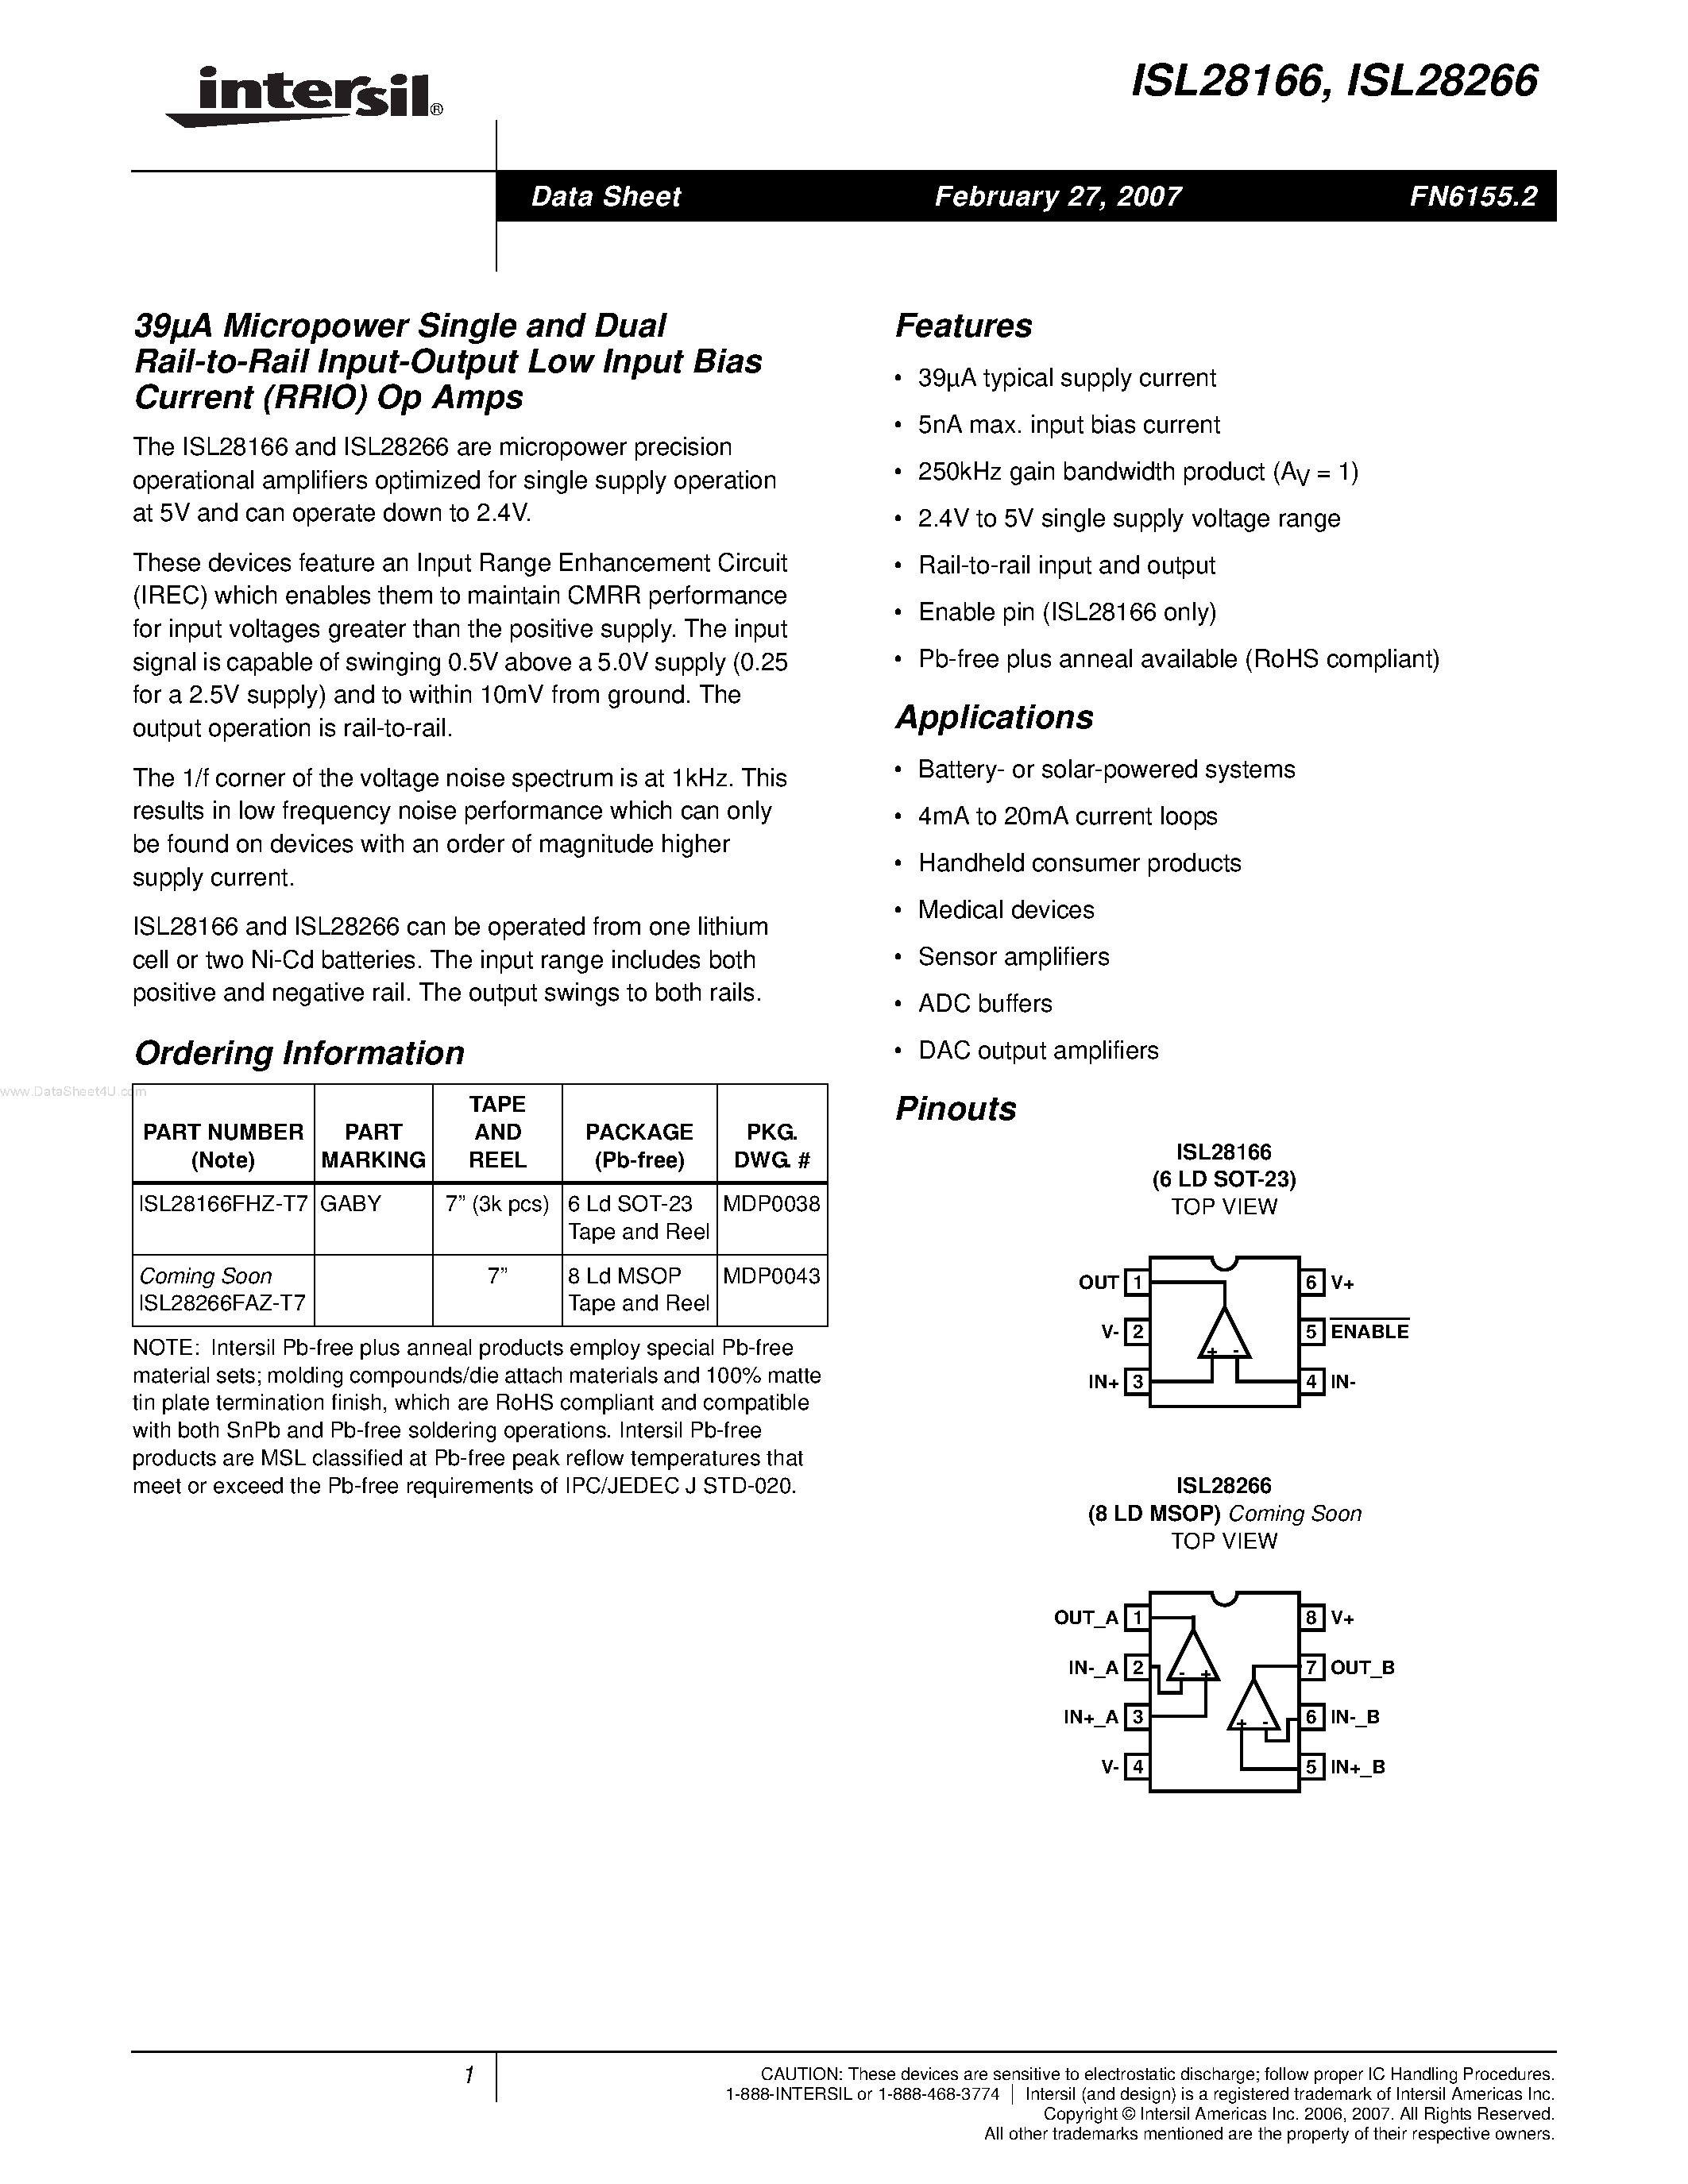 Datasheet ISL28266 - (ISL28166 / ISL28266) 39uA Micropower Single and Dual Rail-to-Rail Input-Output Low Input Bias Current (RRIO) Op Amps page 1